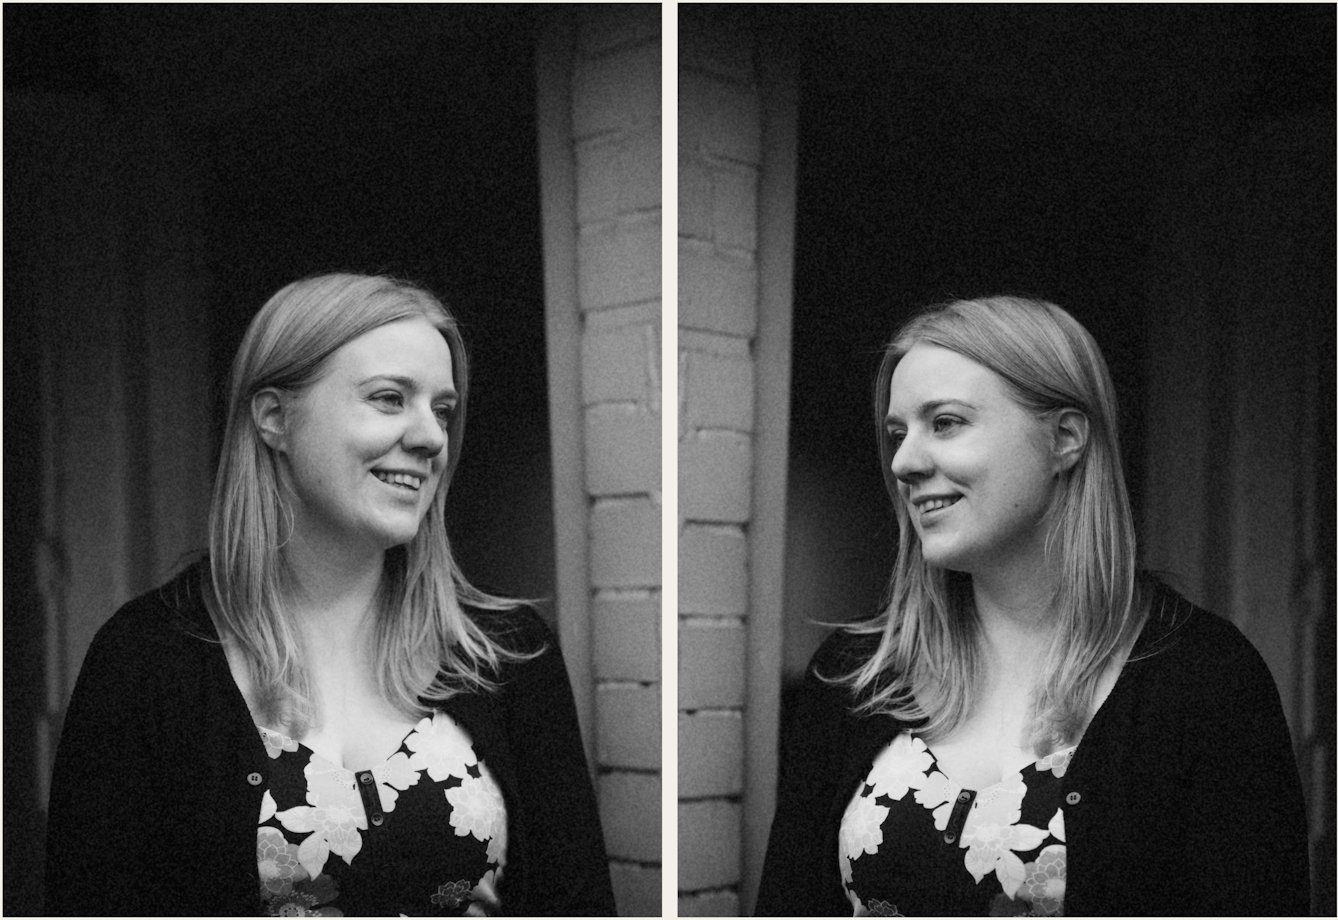 Photographic black and white diptych. The images both show the same young woman with blond hair, wearing a floral dress and black cardigan, standing outside a front door and white brickwork. In each image she is pictured in profile, looking towards herself in the other image, as if in a mirror. In both images the woman is smiling.